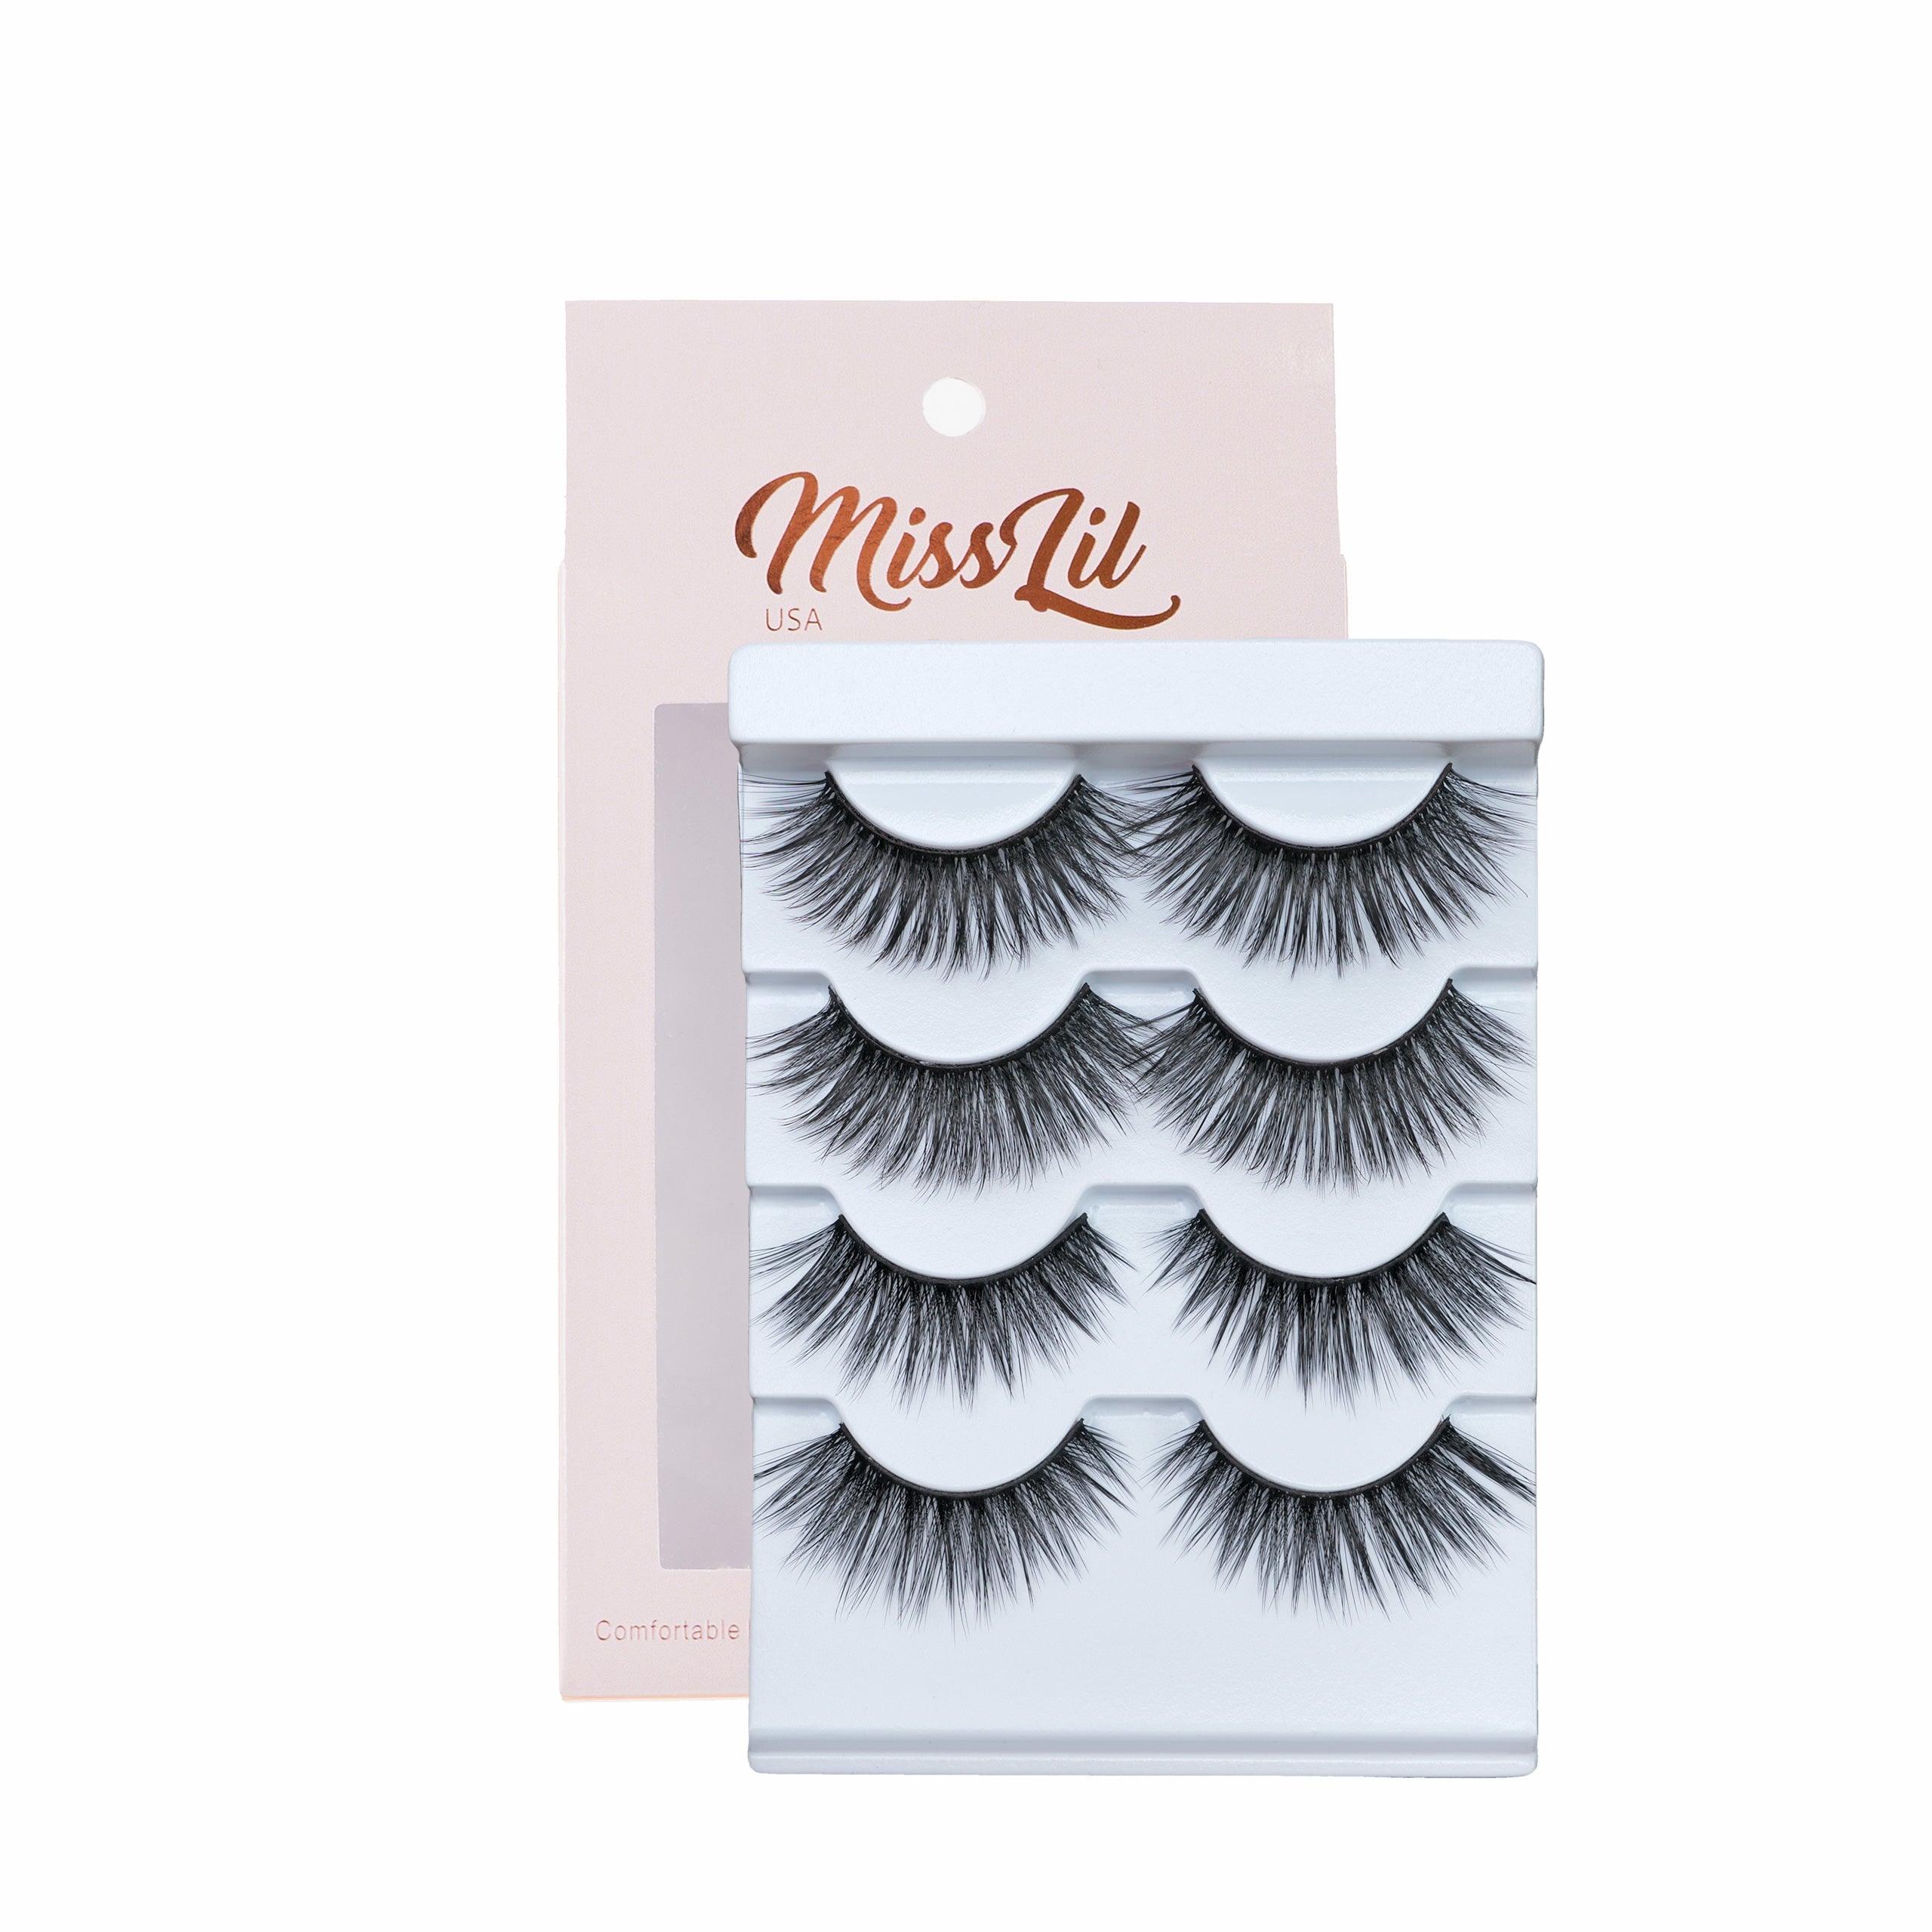 4 Pairs Lashes Classic Collection #19 (Pack of 12) - Miss Lil USA Wholesale